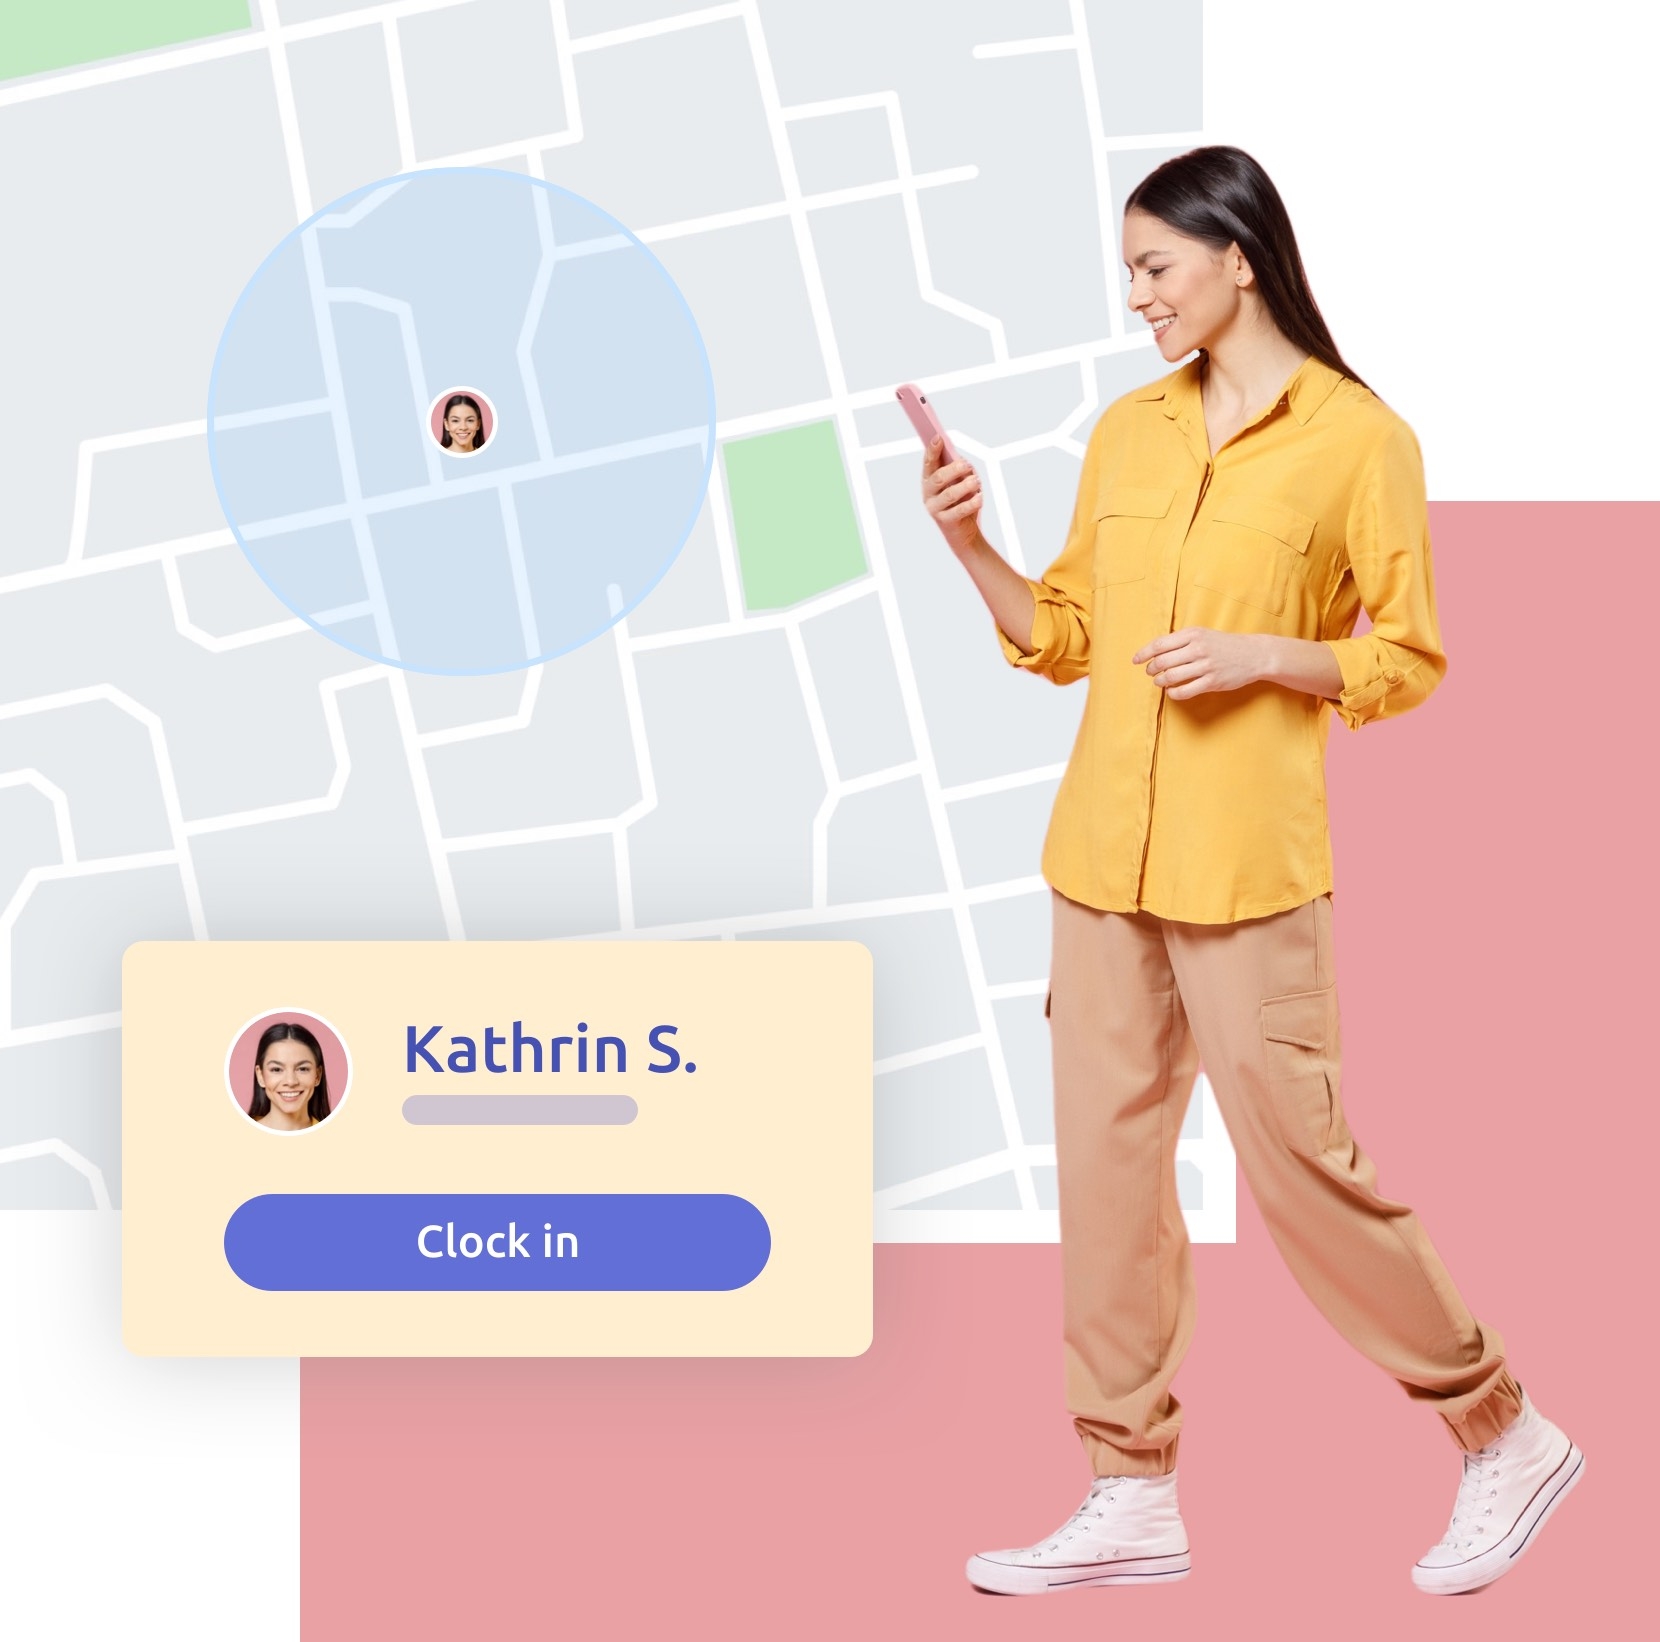 Set up a radius around a certain address and allow employees only to clock in and out of their shifts if they are located within the given radius.